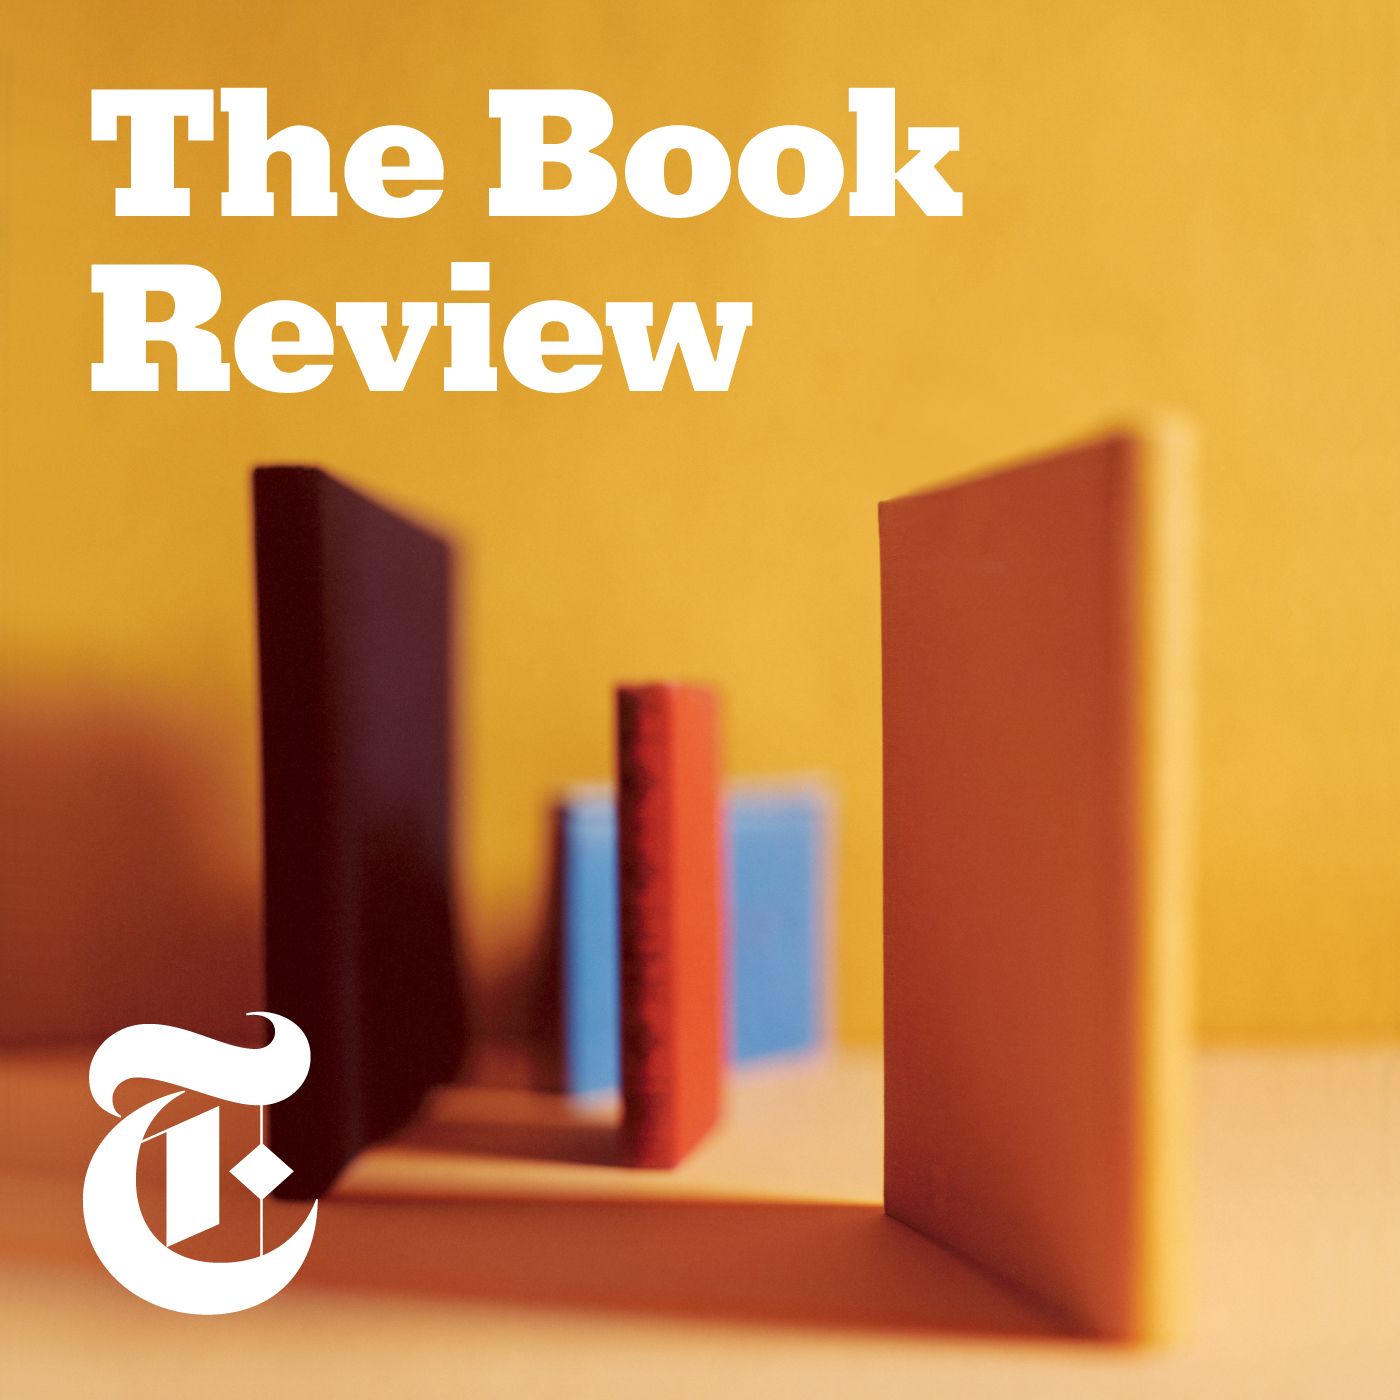 Advertise on “The Book Review Podcast”